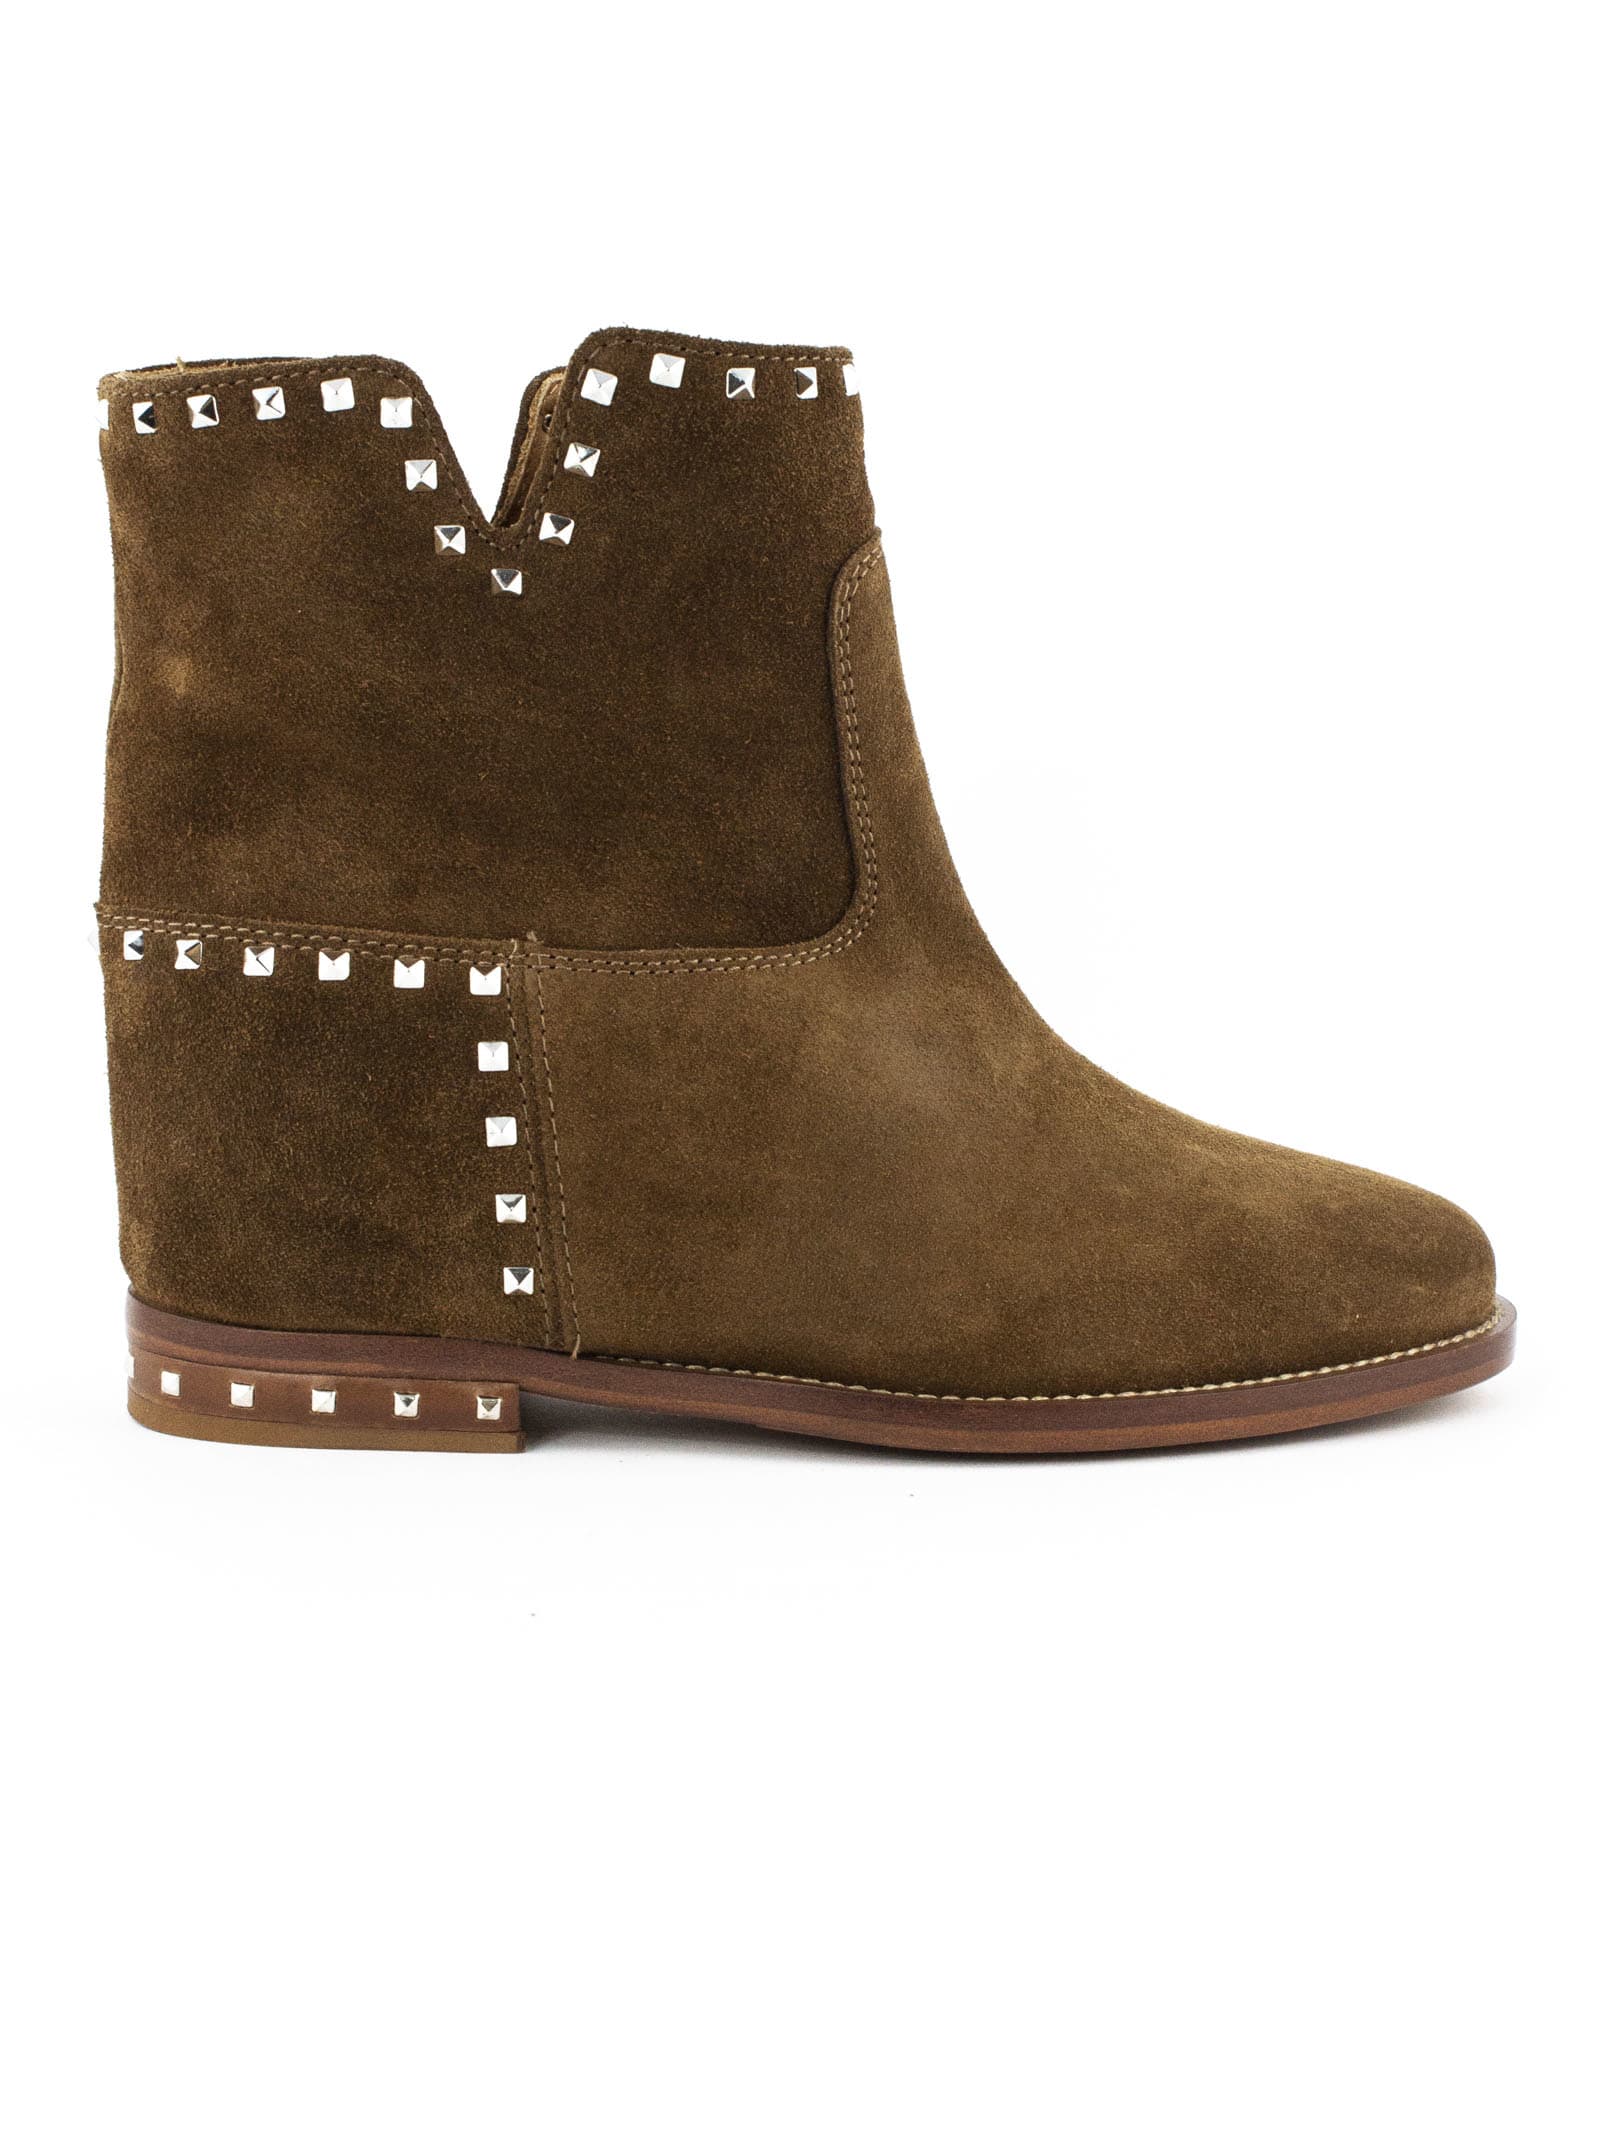 VIA ROMA 15 BROWN SUEDE ANKLE BOOTS,11317658